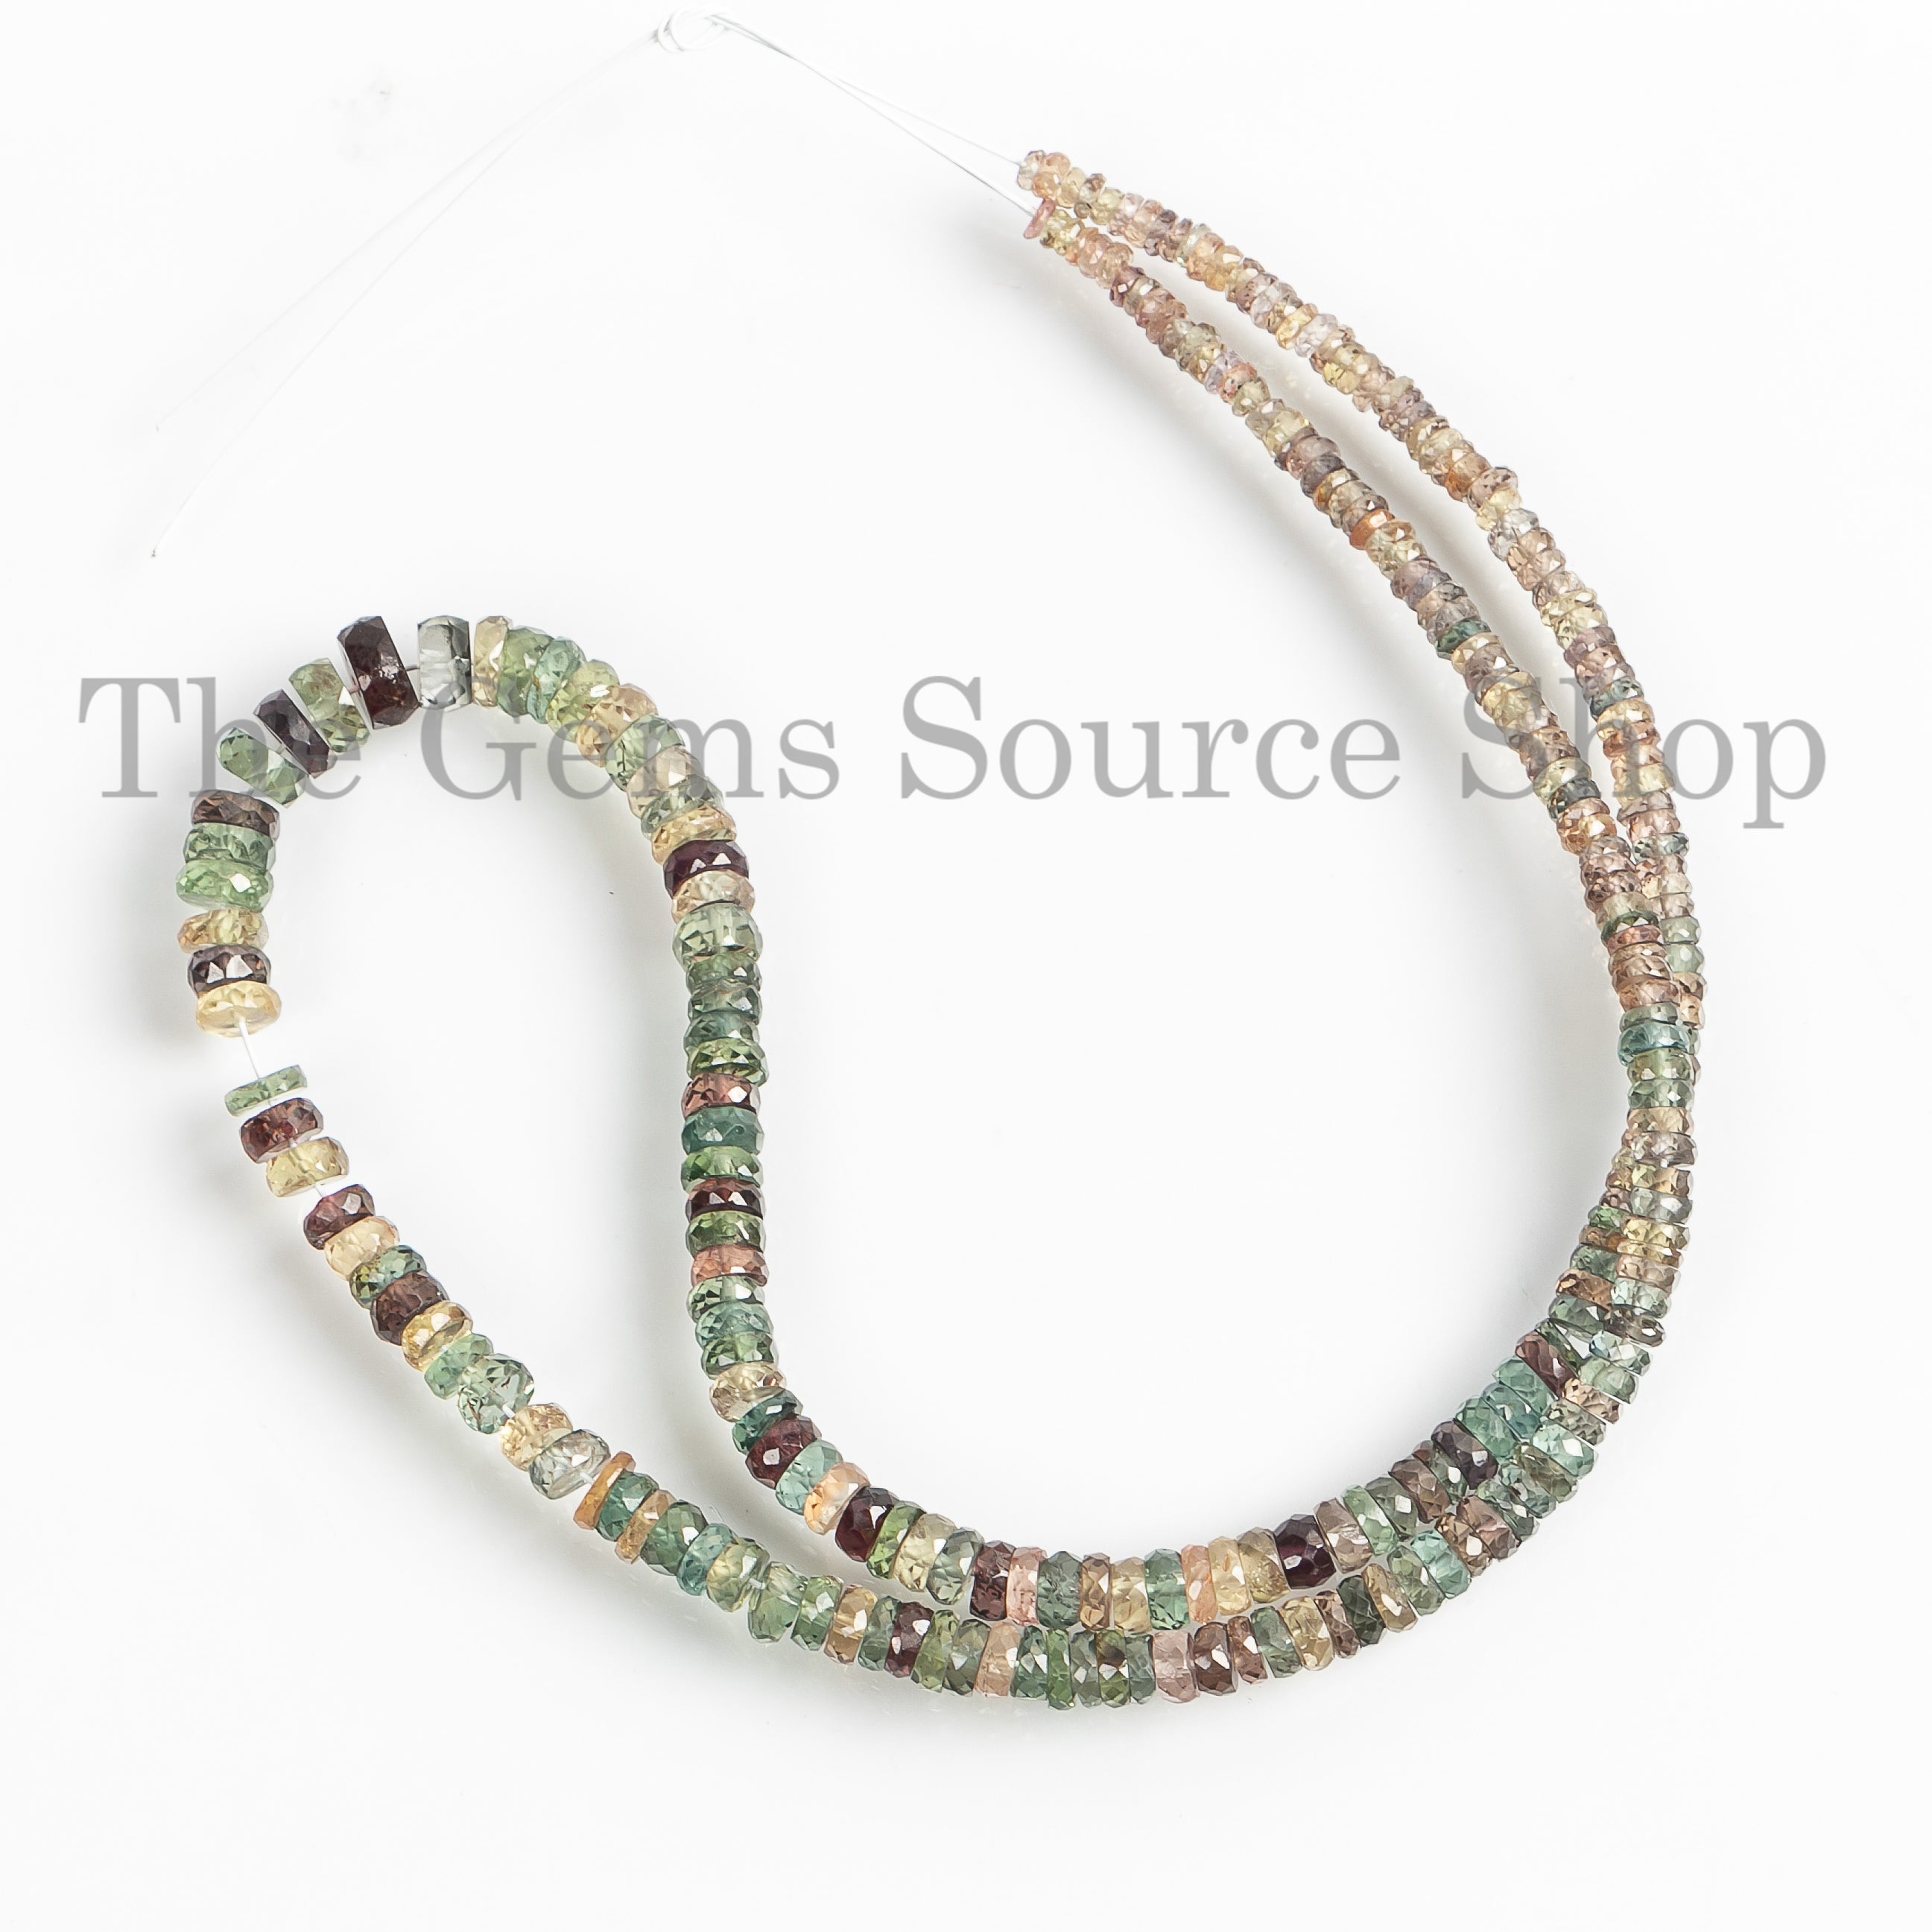 Disco Sapphire Faceted Beads, Sapphire Tyre Shape Beads